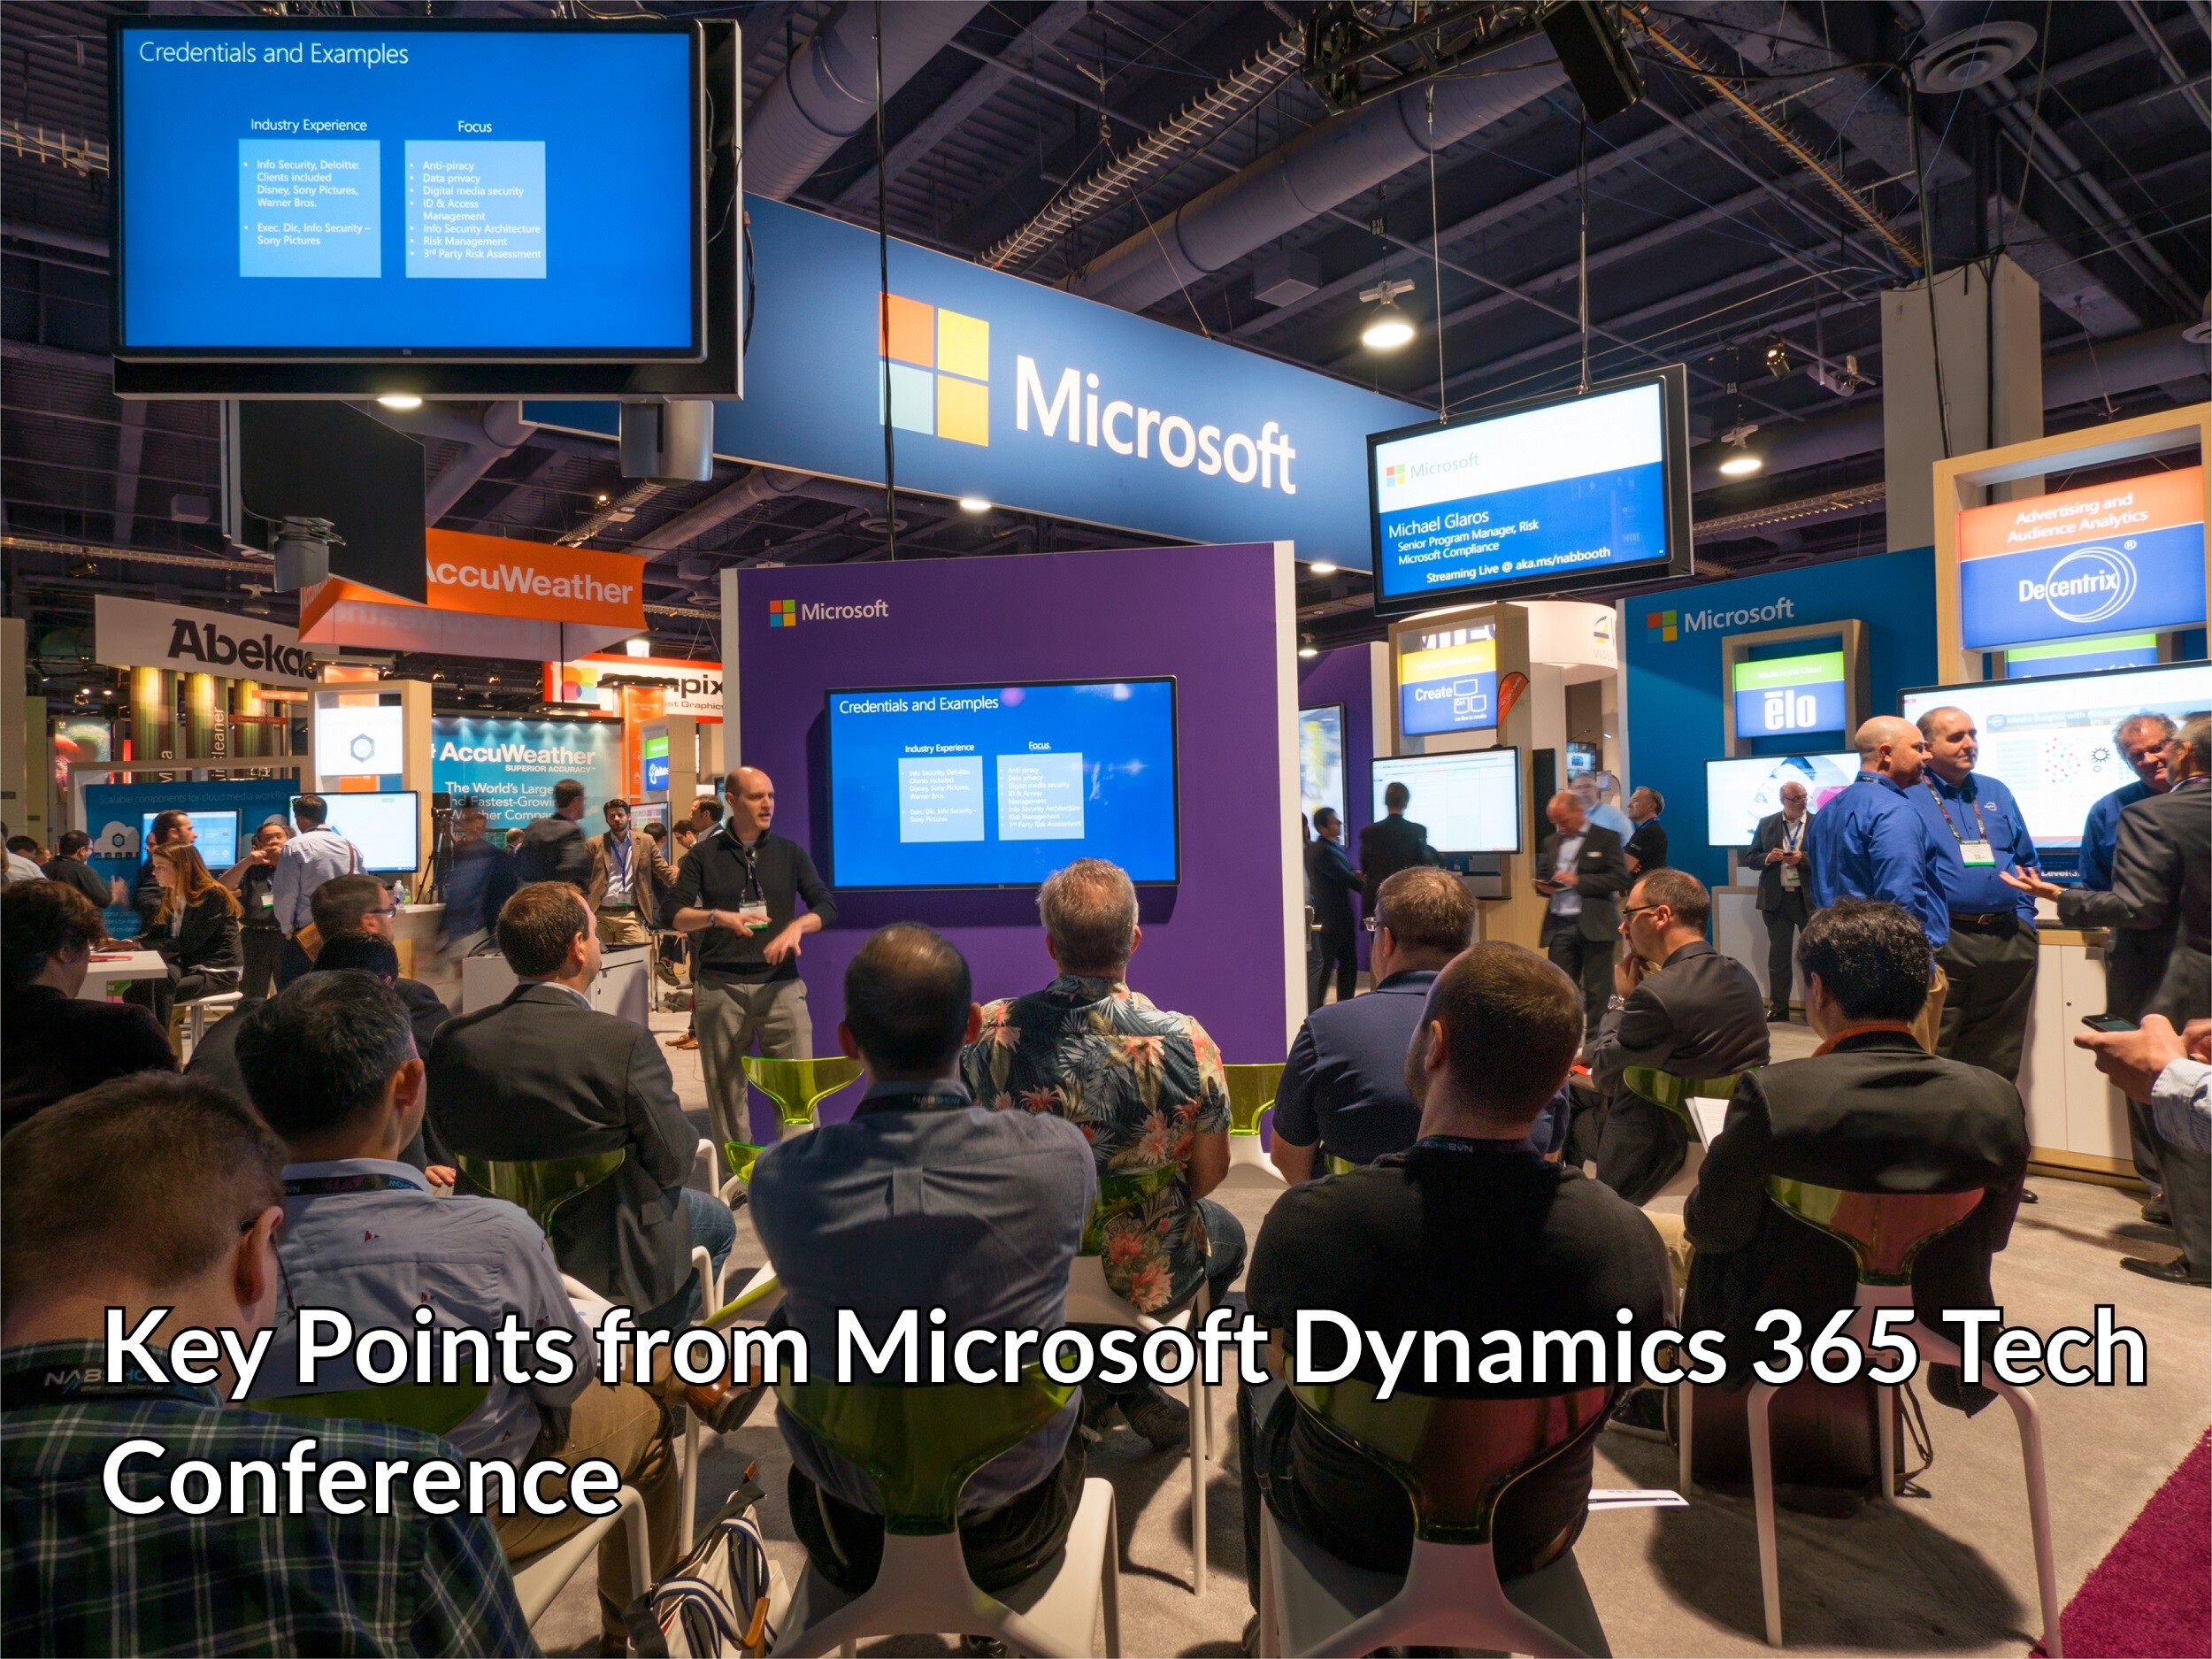 Key Points from Microsoft Dynamics 365 Tech Conference